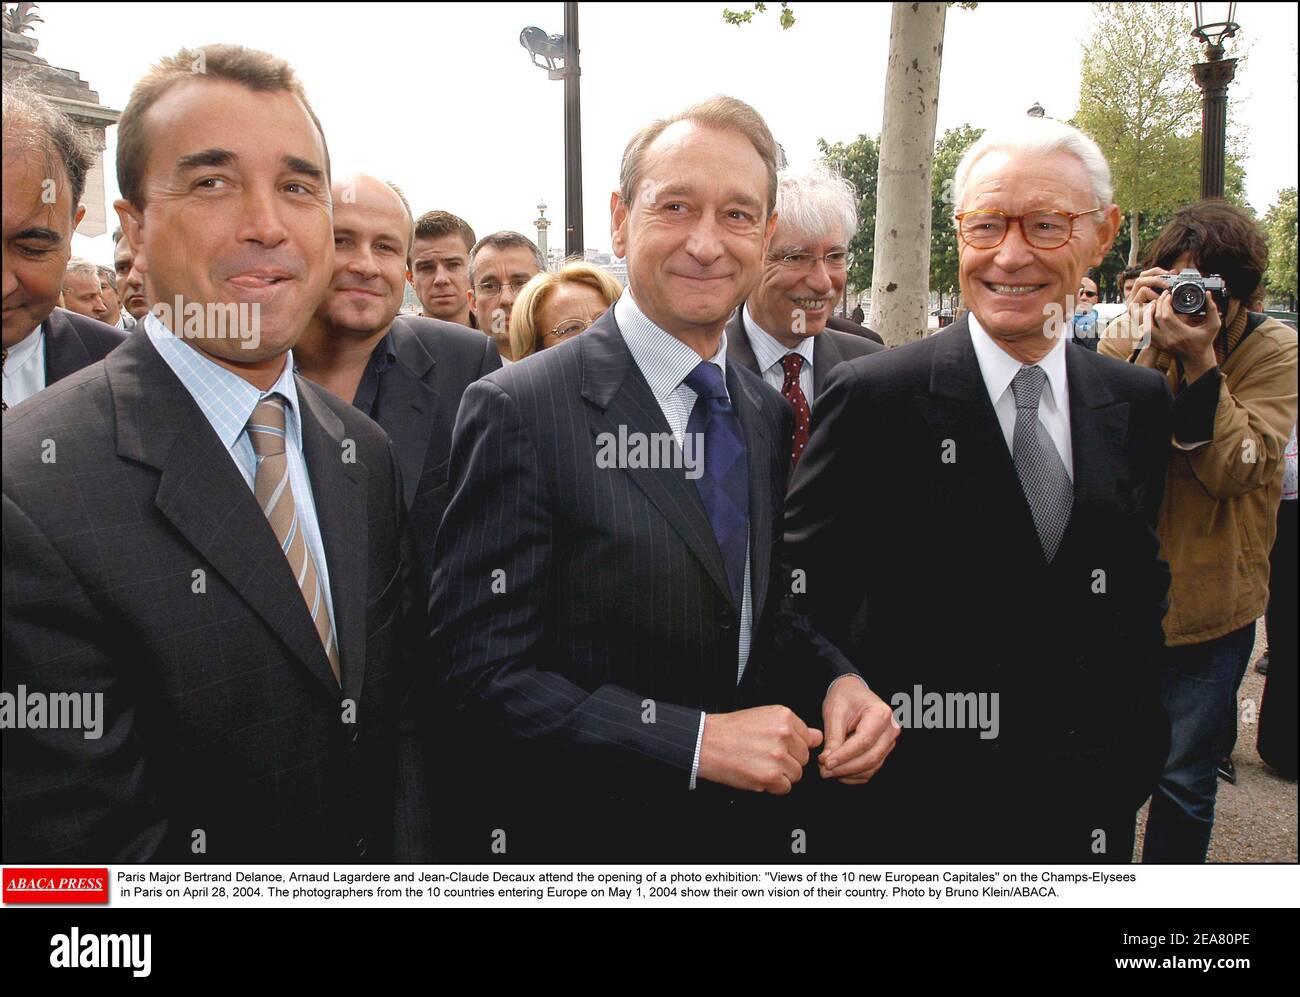 Paris Major Bertrand Delanoe, Arnaud Lagardere and Jean-Claude Decaux  attend the opening of a photo exhibition: Views of the 10 new European  Capitales on the Champs-Elysees in Paris on April 28, 2004.